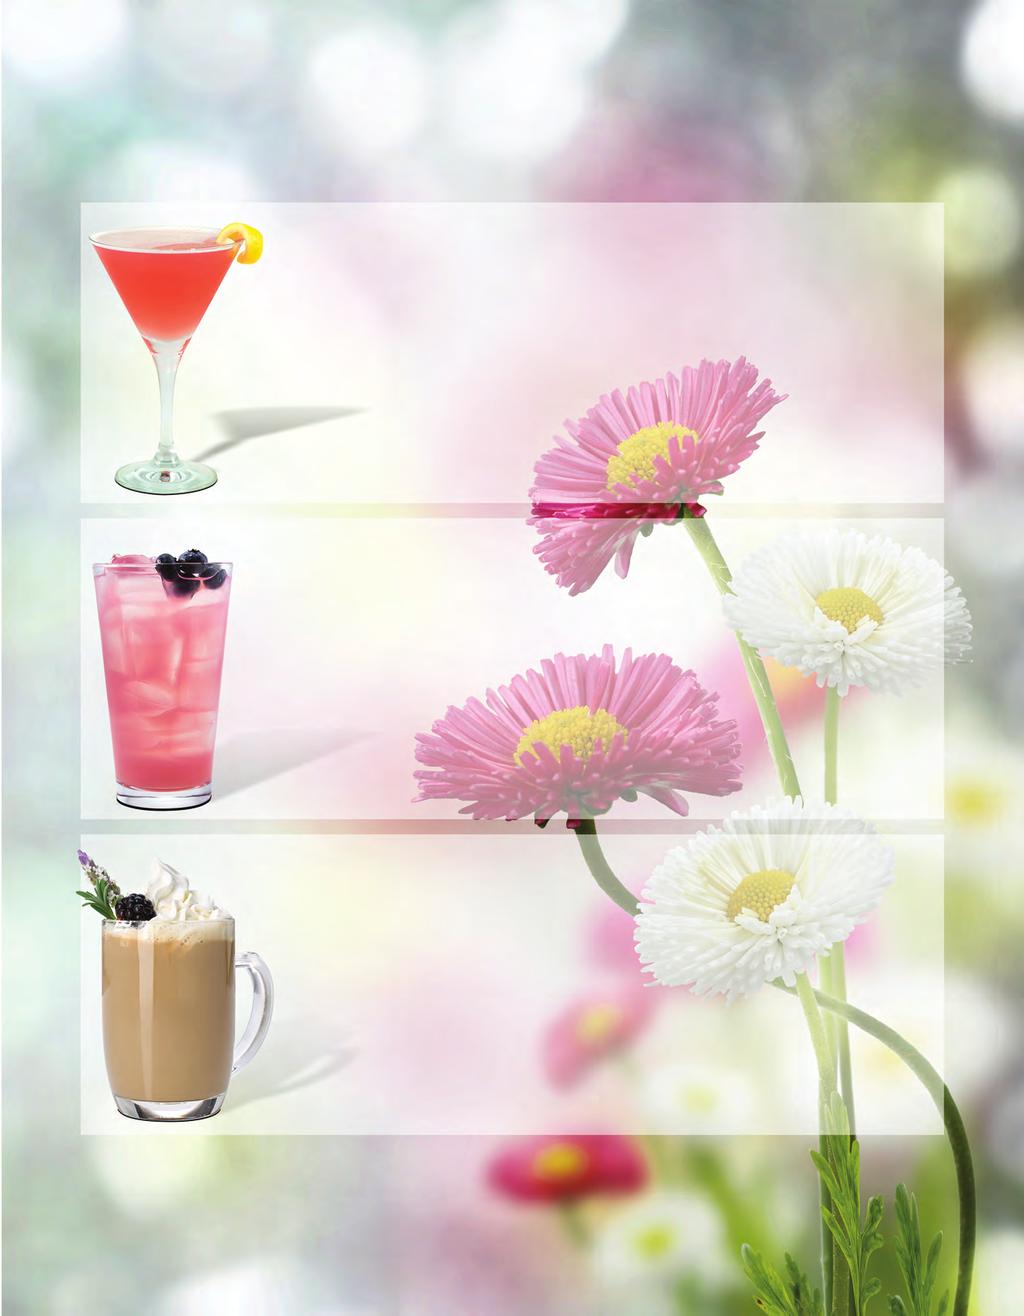 SEASONAL RECIPES Freshen up your menu this spring with offerings that bloom with fresh floral flavor. WILD ROSE MARTINI Glass size: 5 oz. 1 1/2 oz. orange vodka 1/4 oz. Monin Rose Syrup 2 oz.